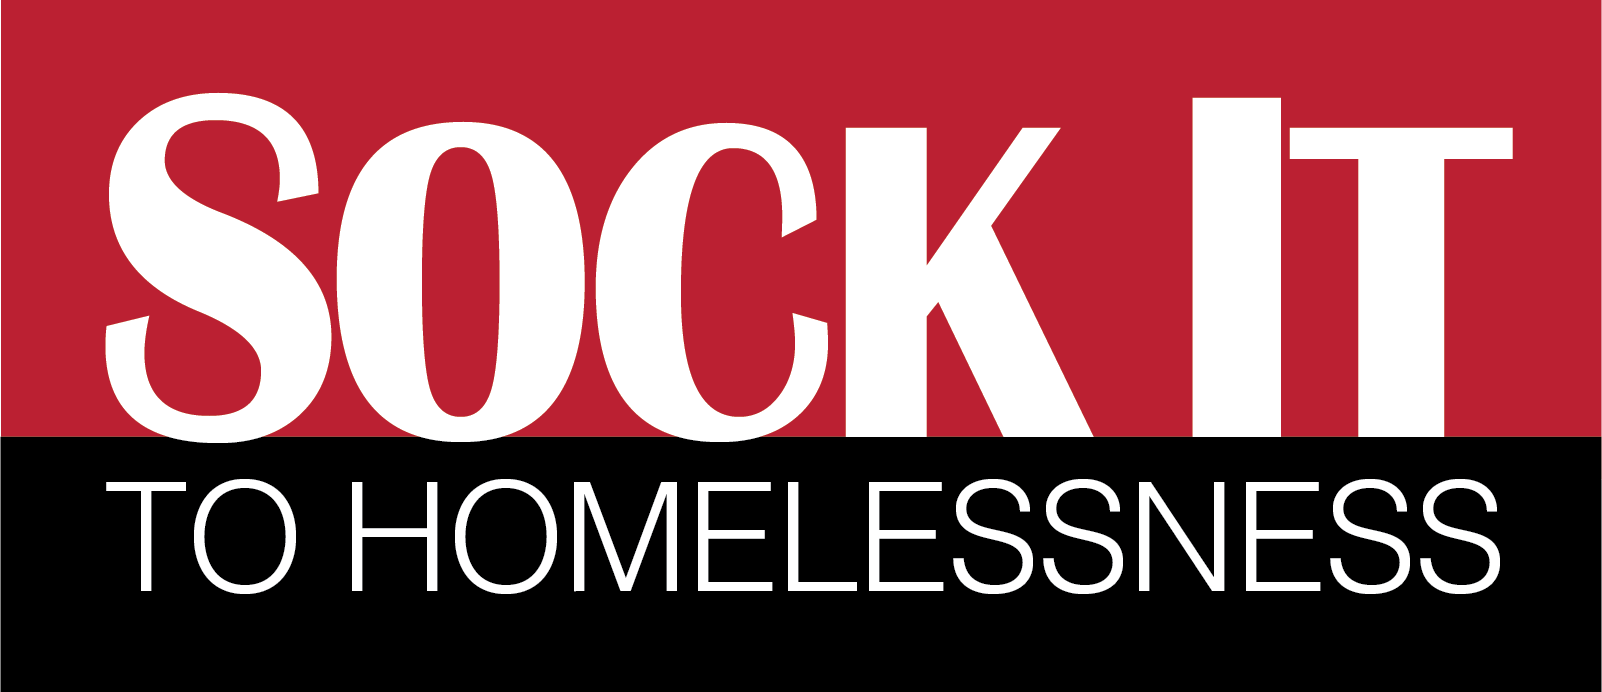 Get more info about Sock It to Homelessness